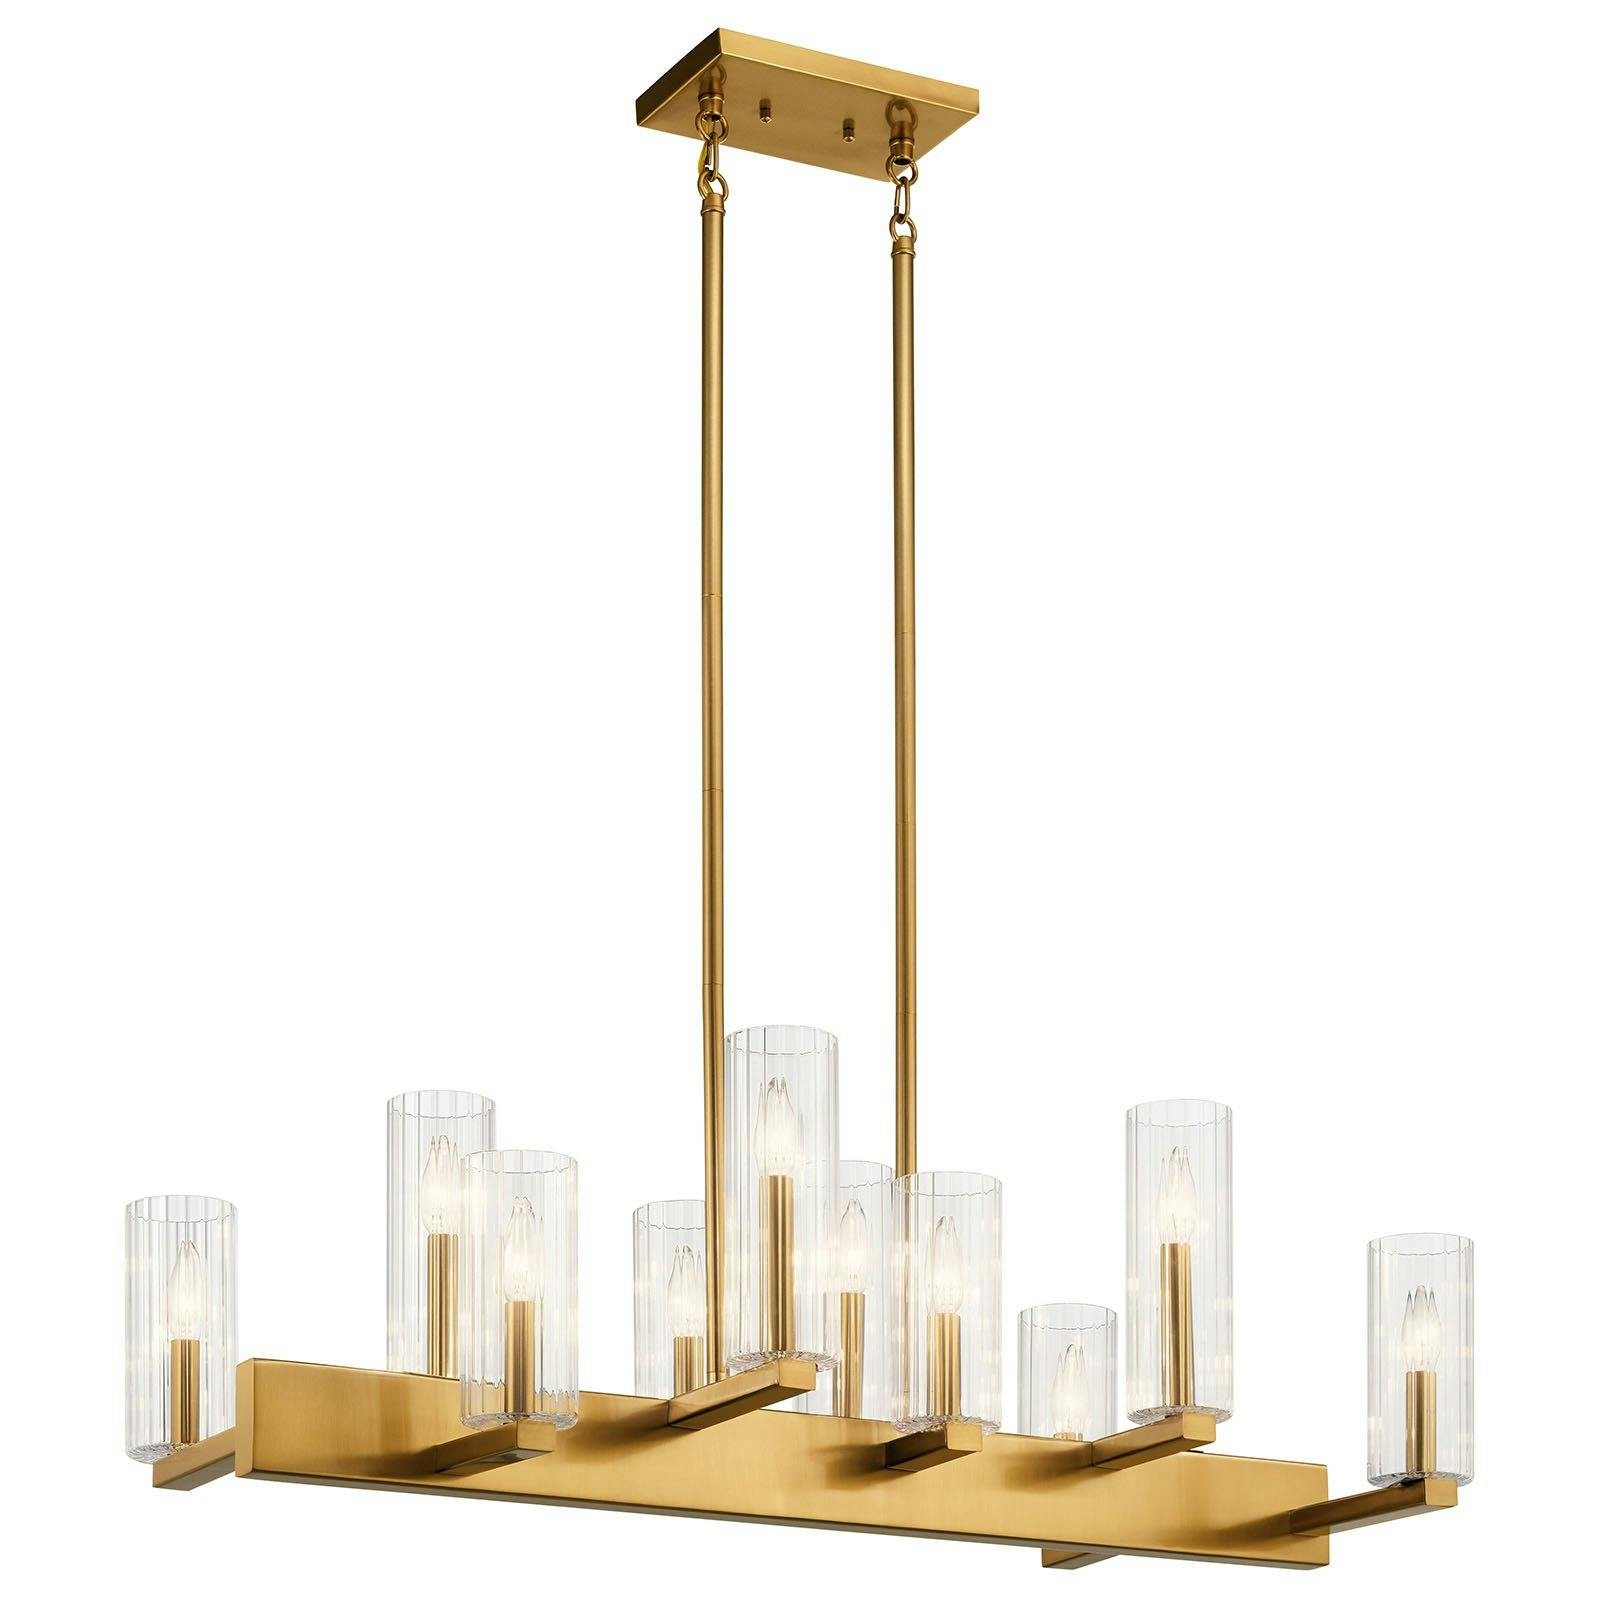 Cleara 10 Light Linear Chandelier Gold on a white background